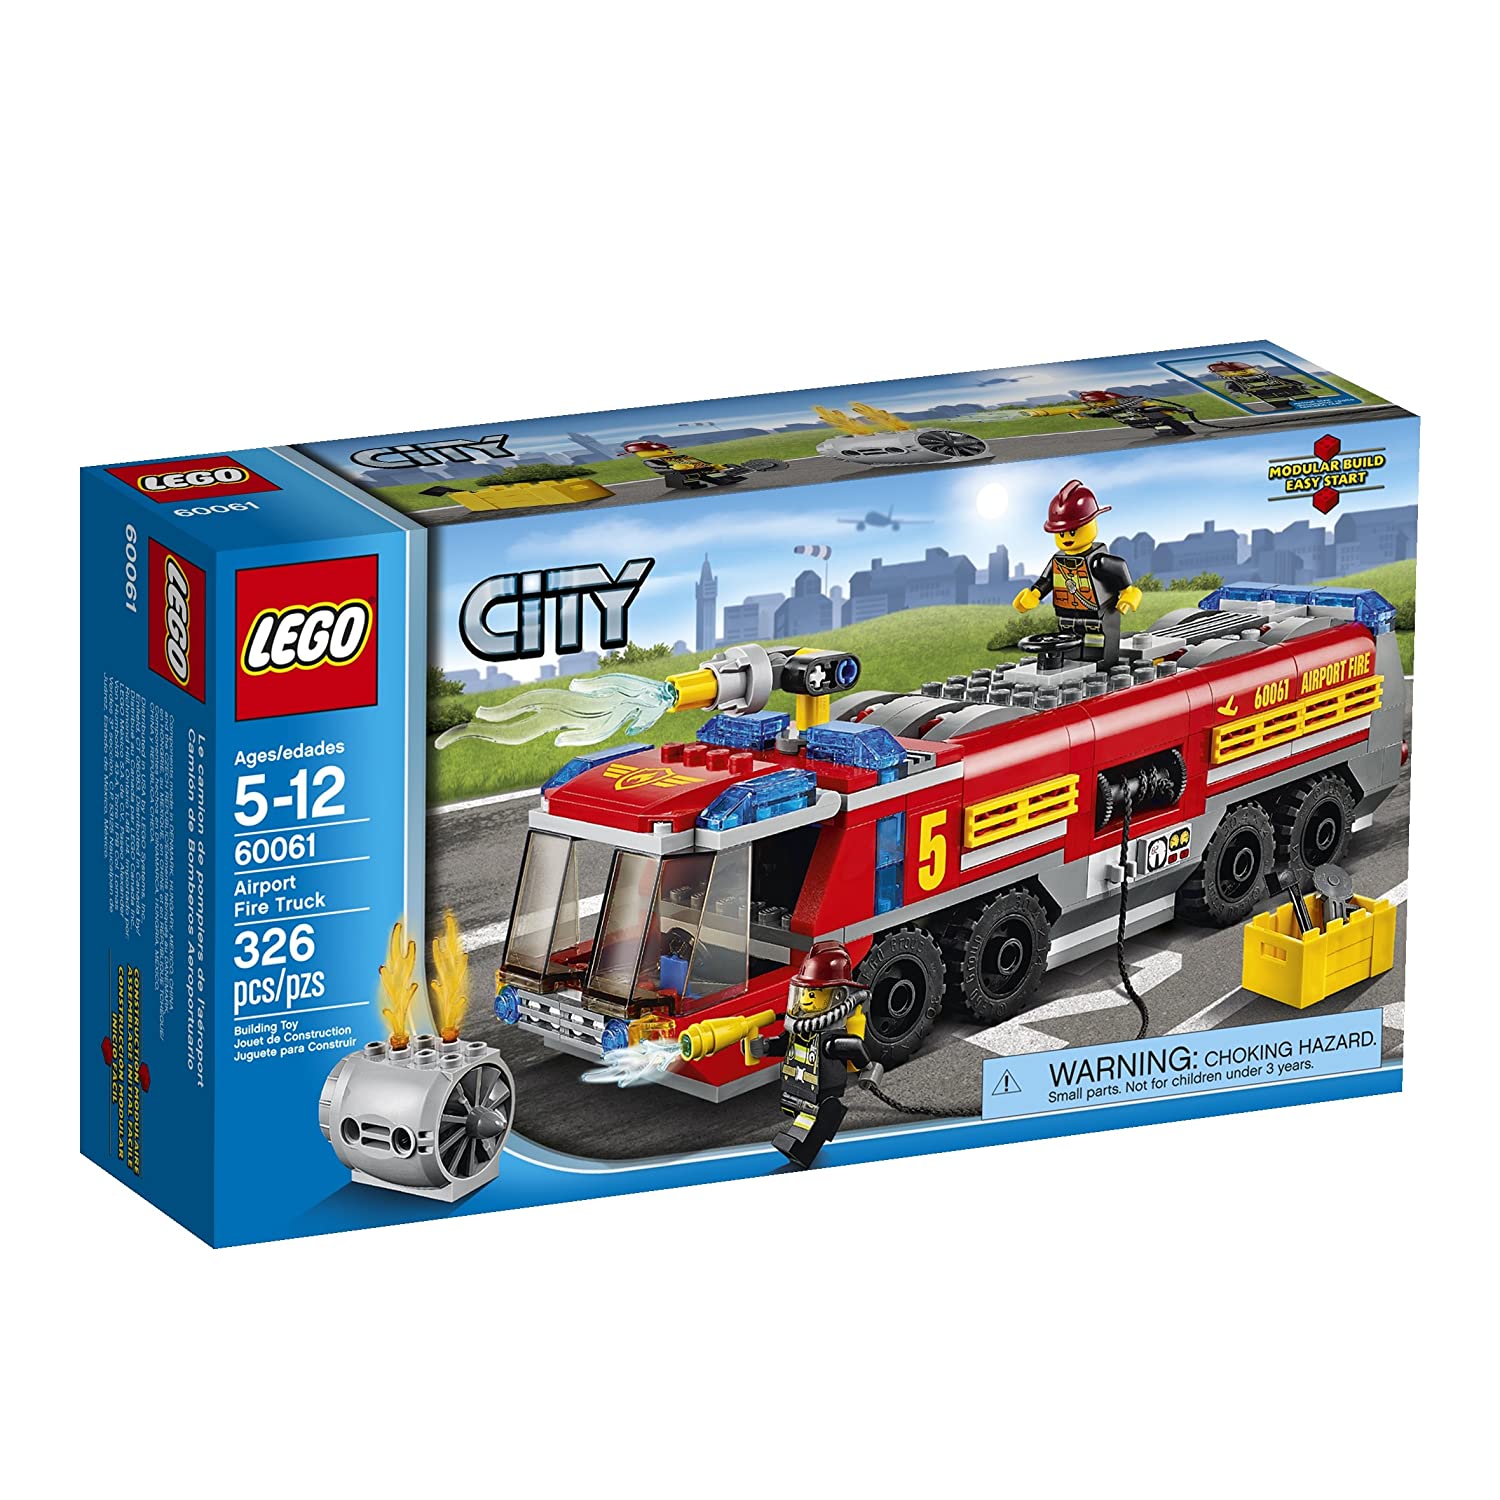 Top 9 Best LEGO Fire Truck Sets Reviews in 2022 9